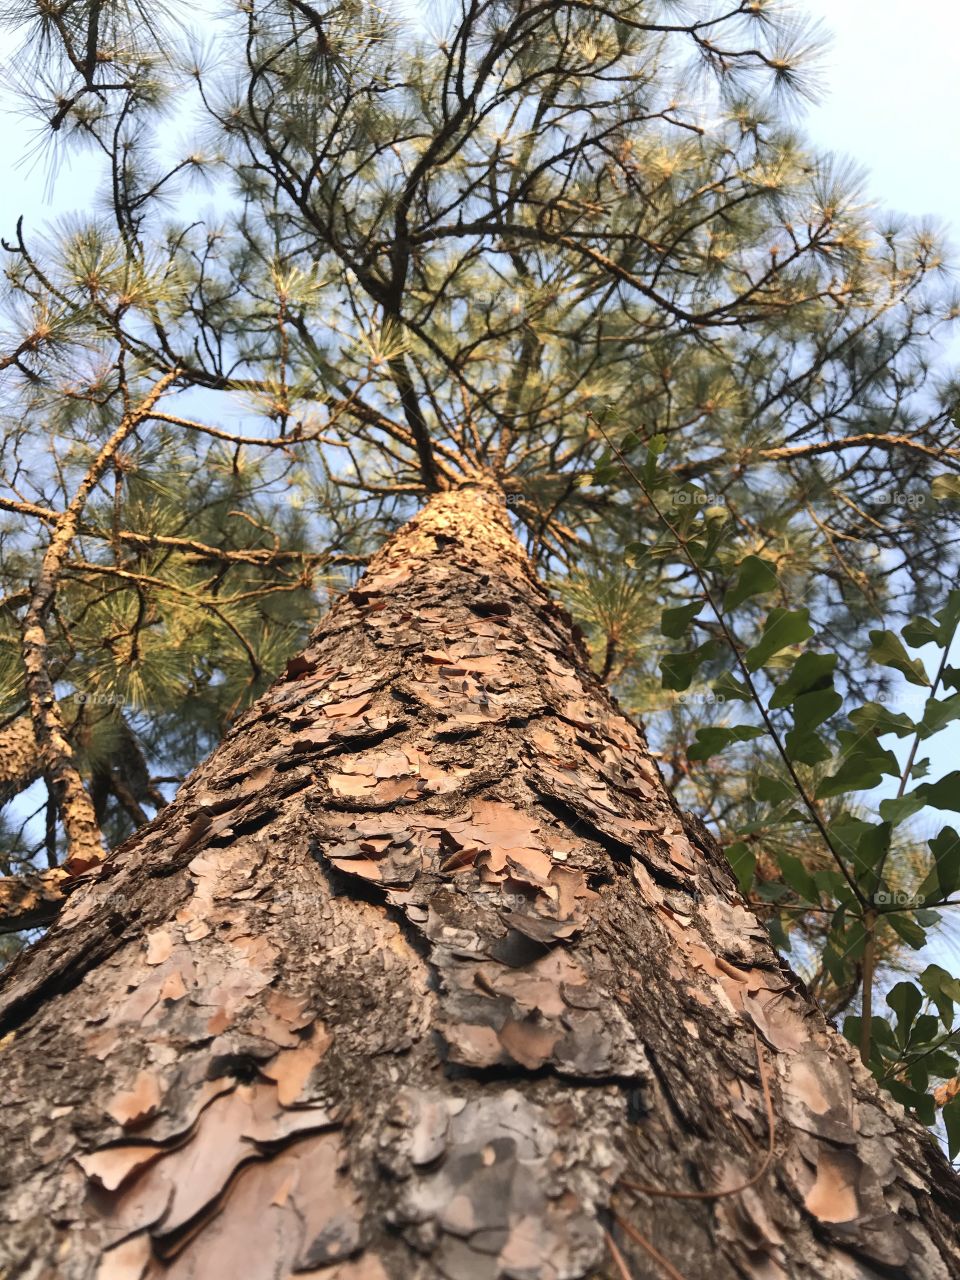 Looking up a majestic Loblolly pine tree